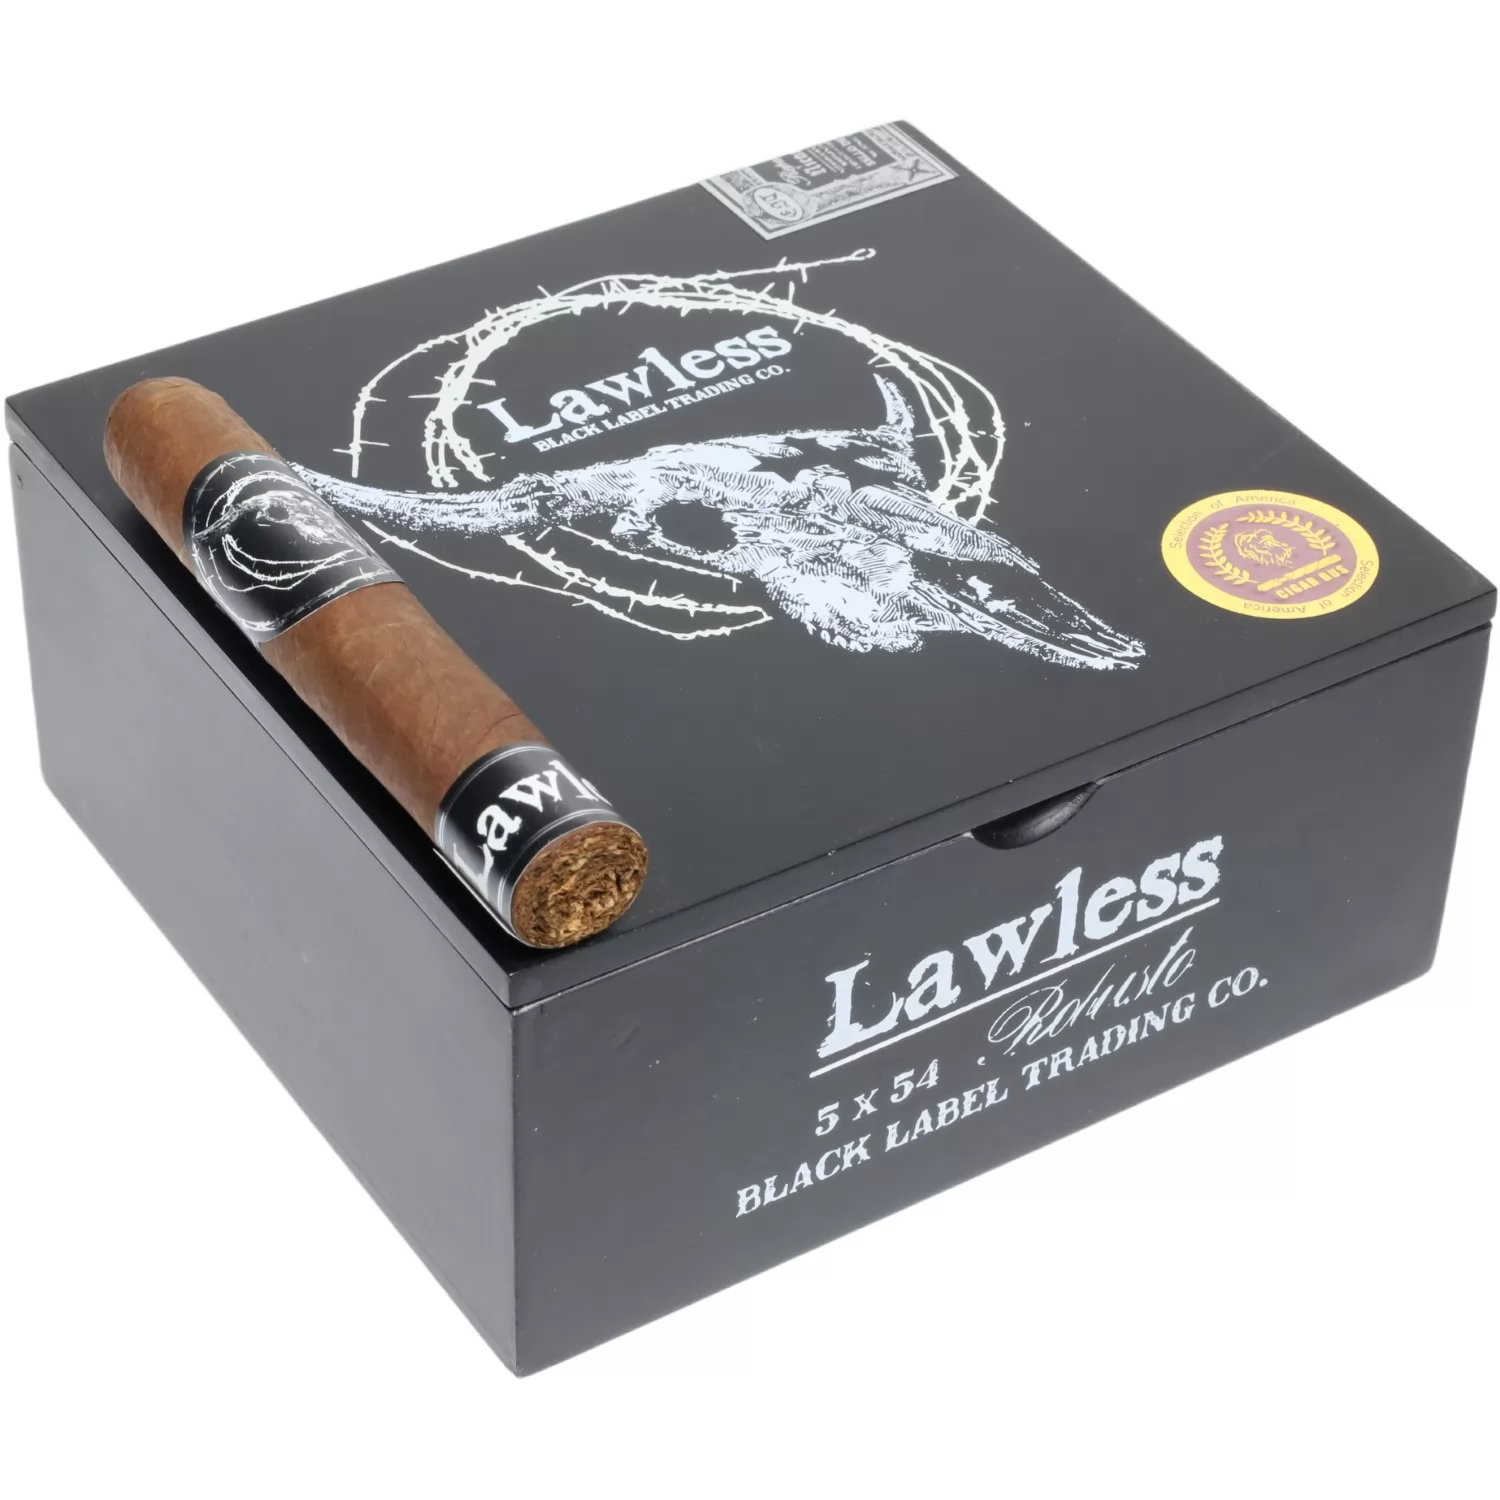 Black Label Trading Co. Lawless 5x54